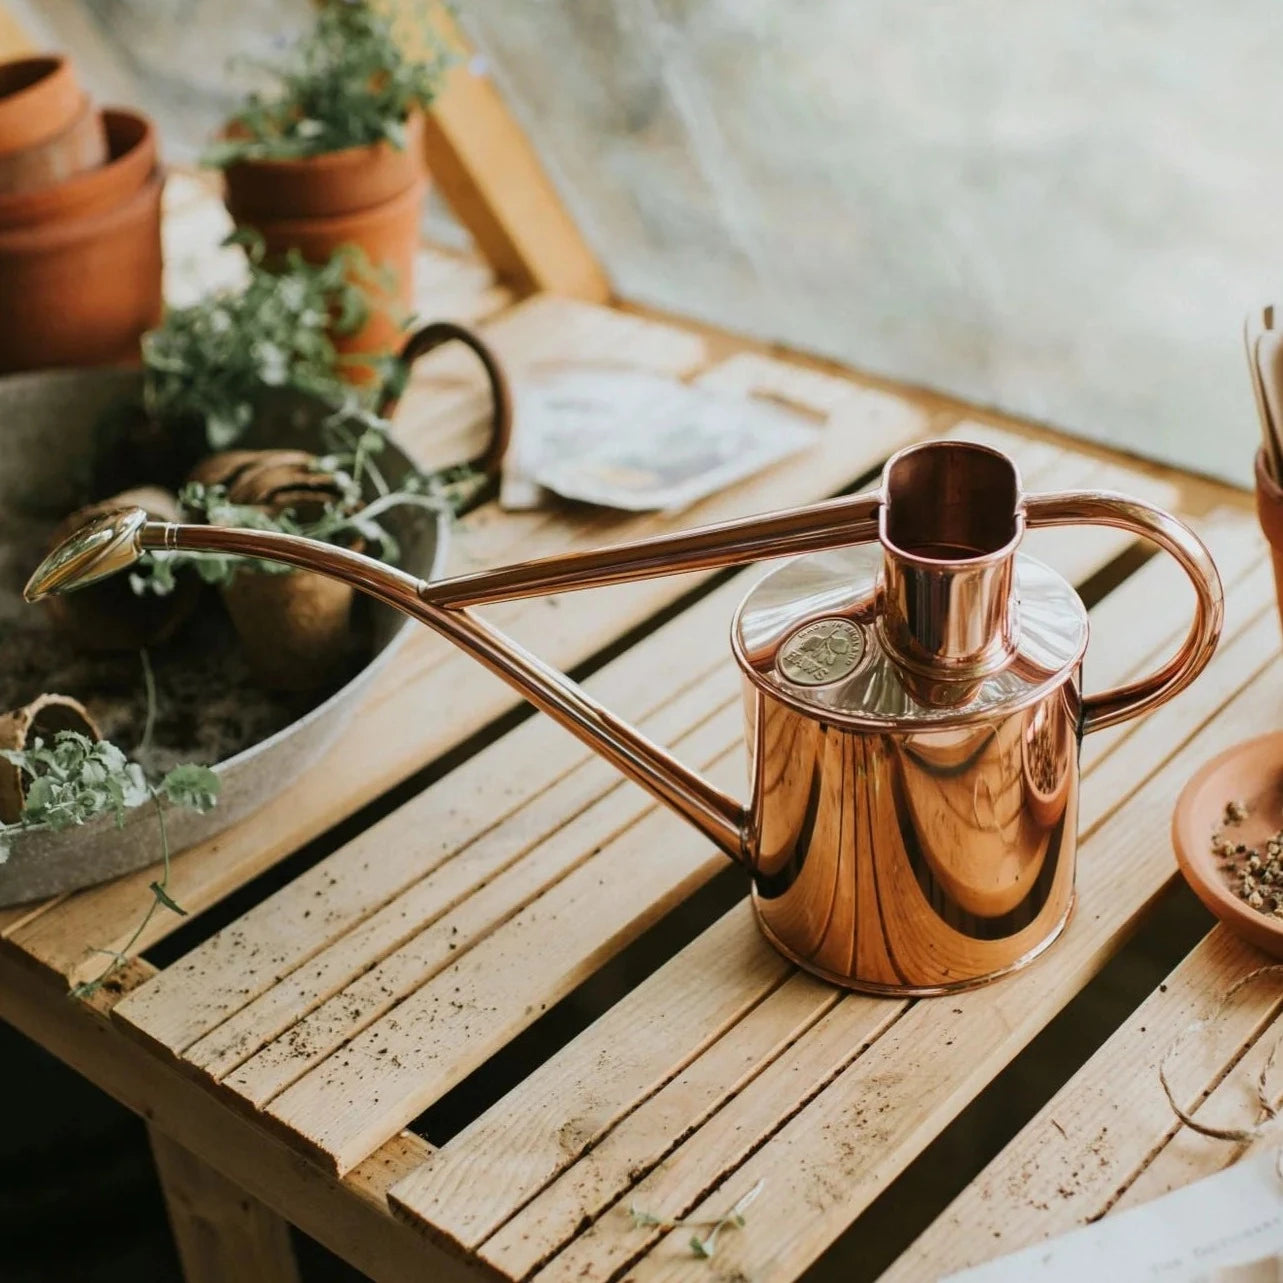 Haws Rowley Ripple Watering Can - 2 Pint Copper setting on a garden workbench